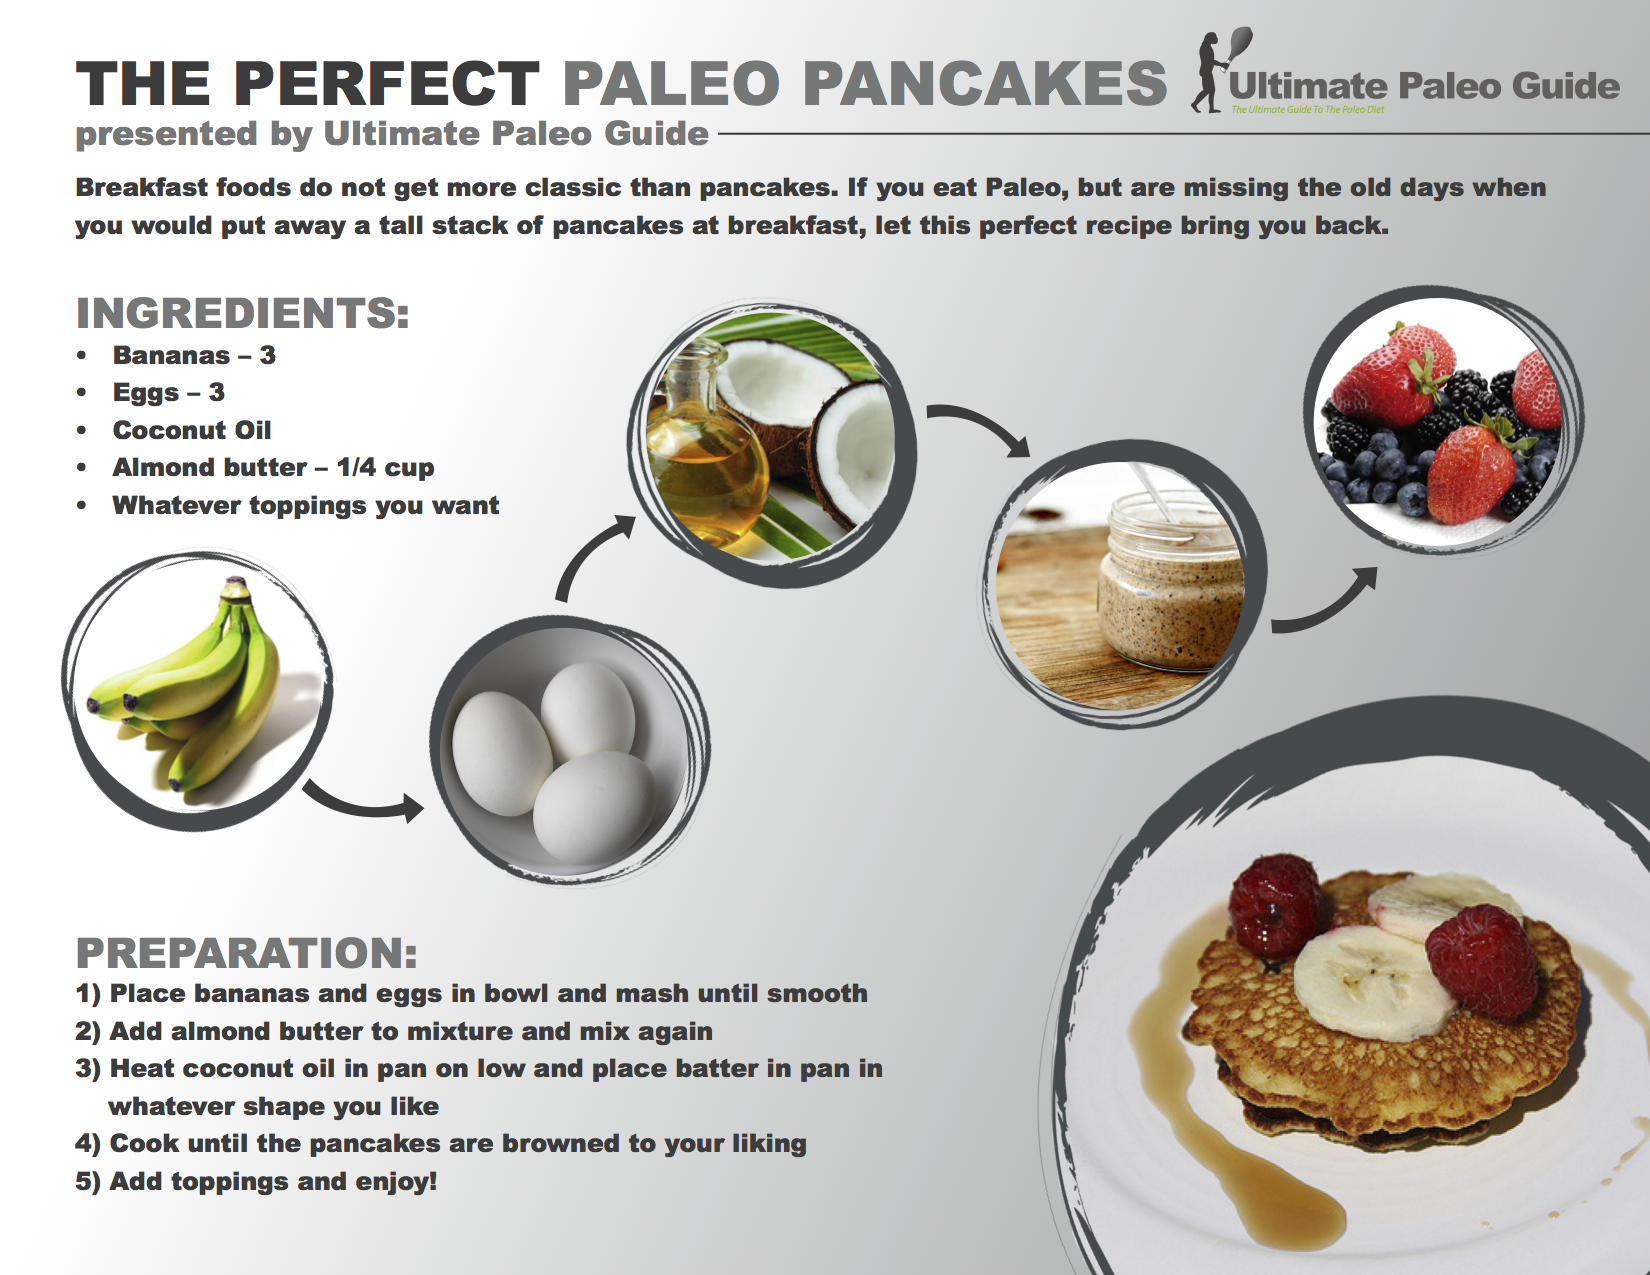 How To Make Paleo Pancakes - Ultimate Paleo Guide